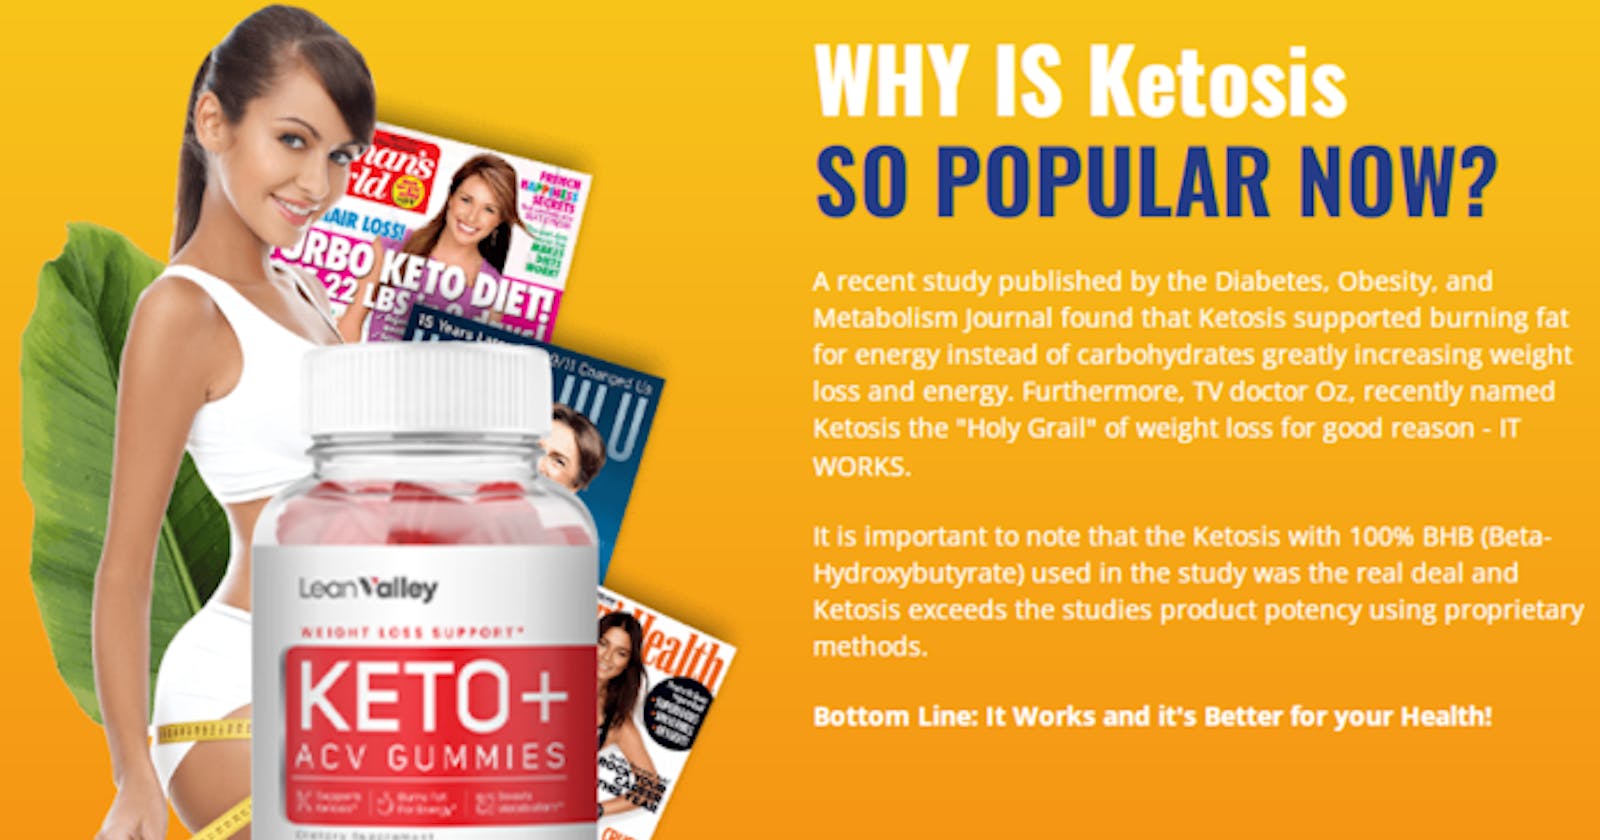 Lean Valley Keto + ACV Gummies 2023: Proven Results Before And After Do the Lean Valley Keto Plus ACV Gummies Pills